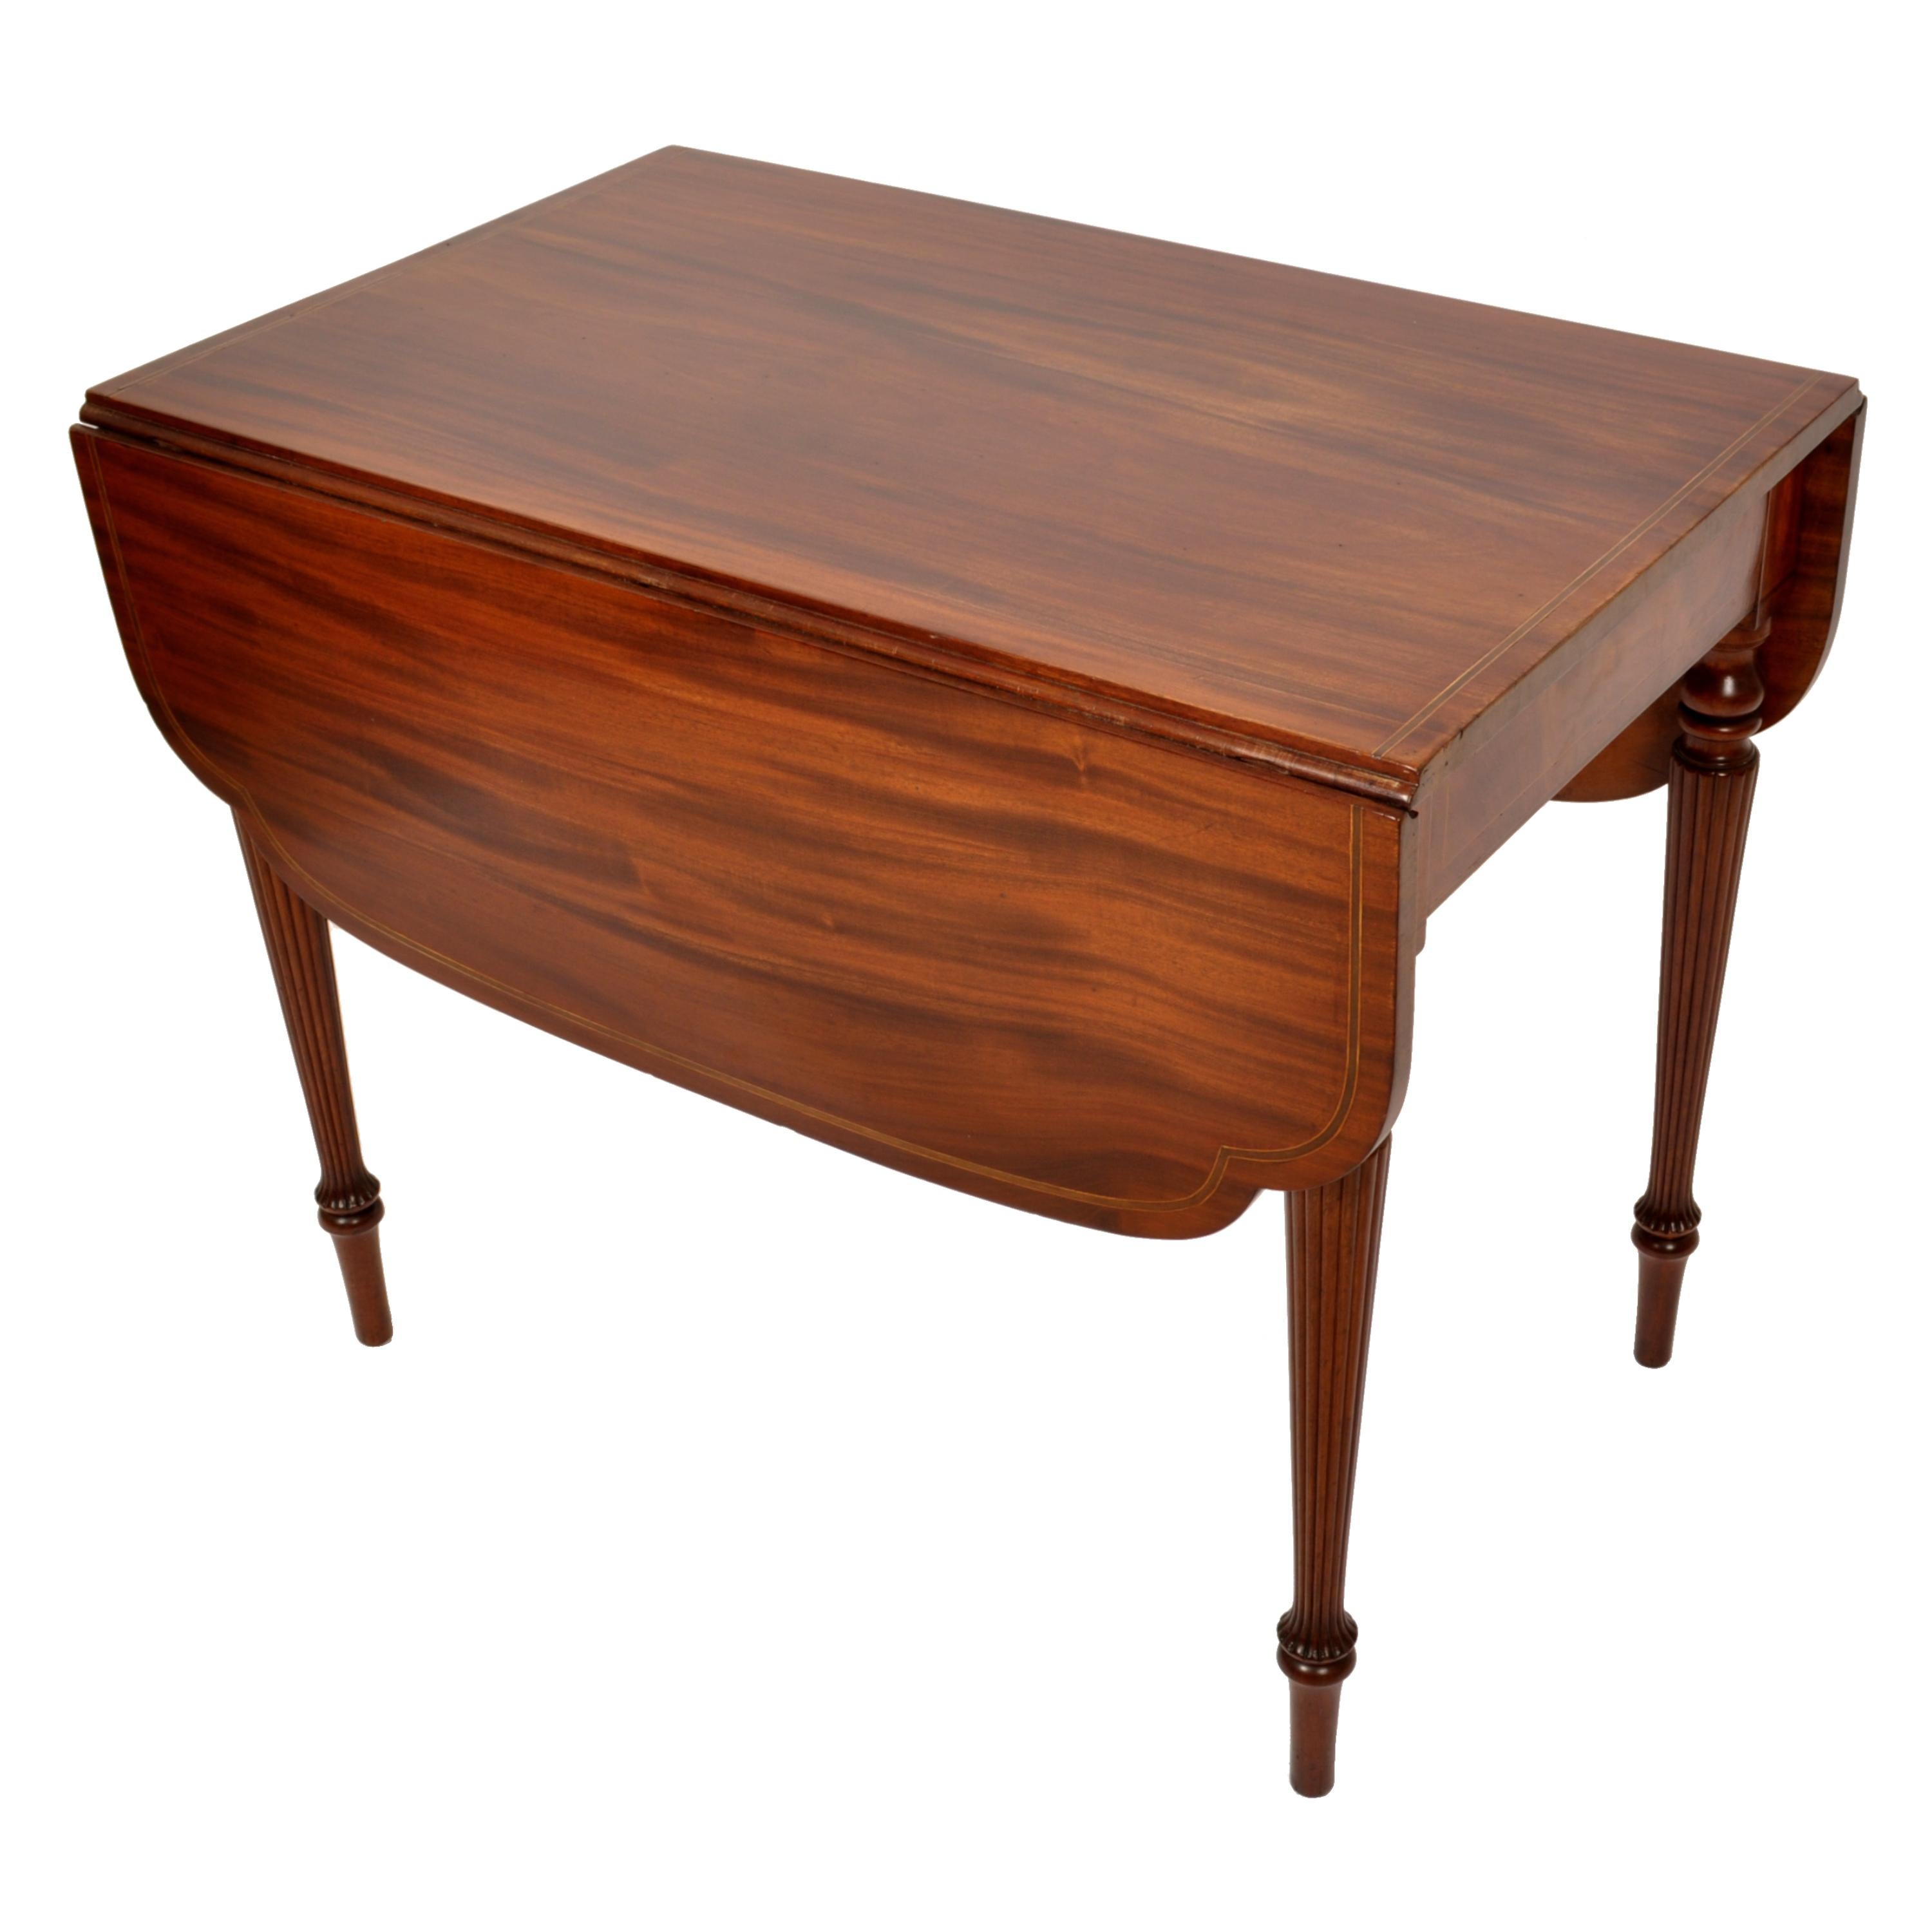 Antique American Federal Sheraton Inlaid Mahogany Pembroke Table New York 1790 For Sale 9